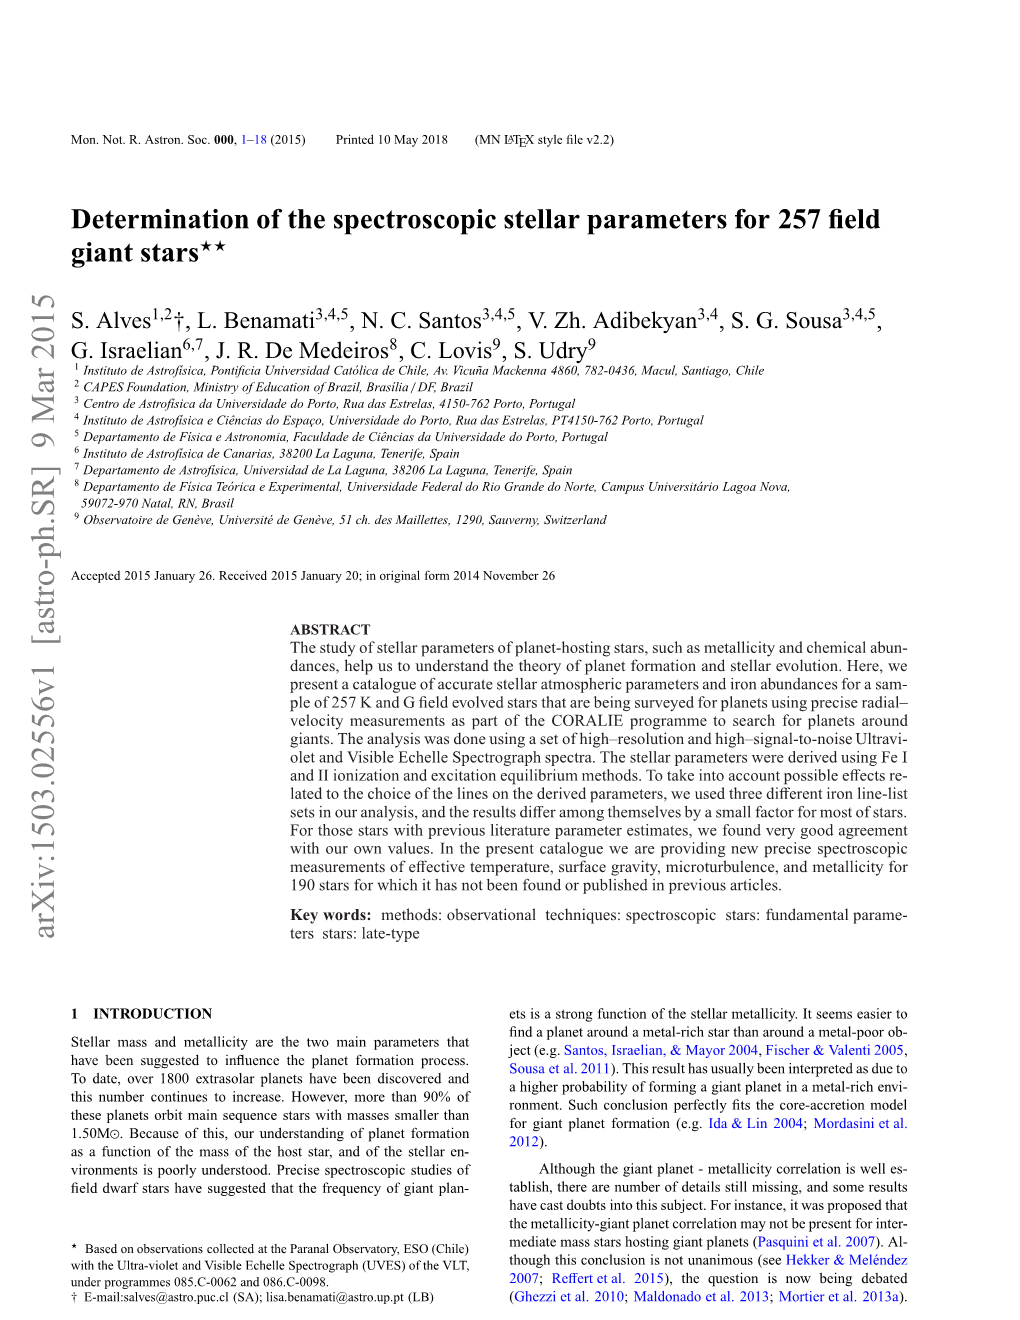 Determination of the Spectroscopic Stellar Parameters for 257 Field Giant